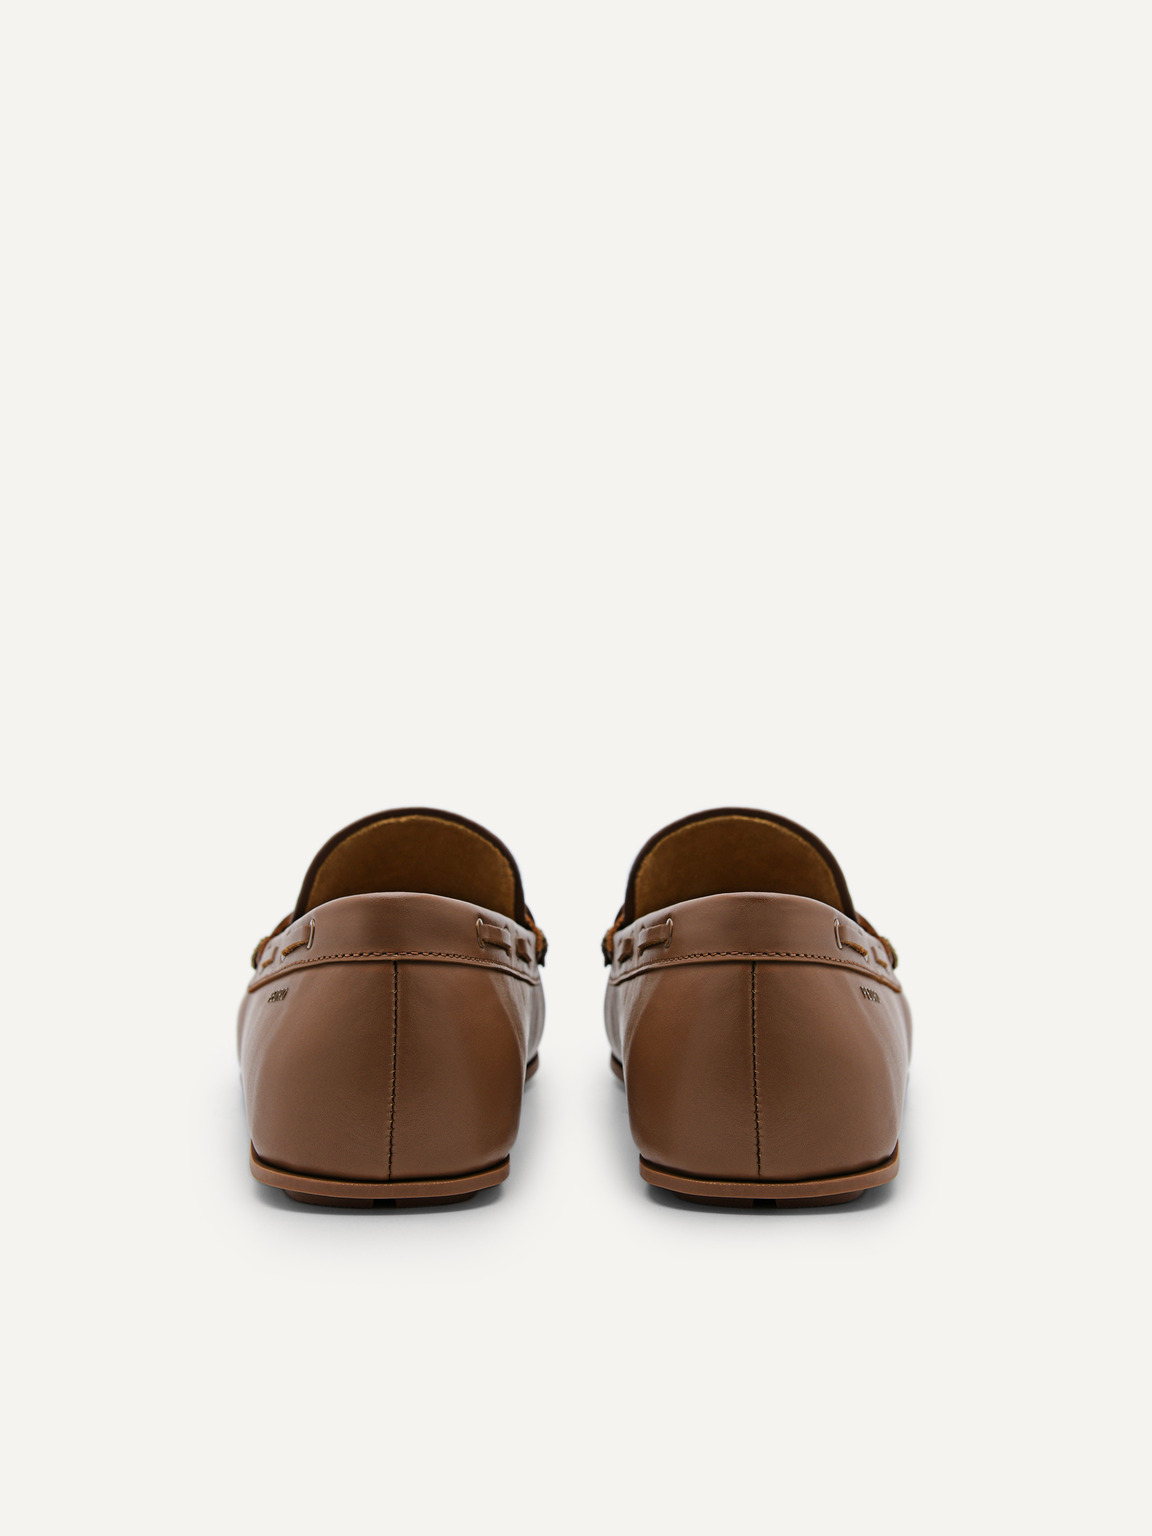 Leather Bow Driving Shoes, Camel